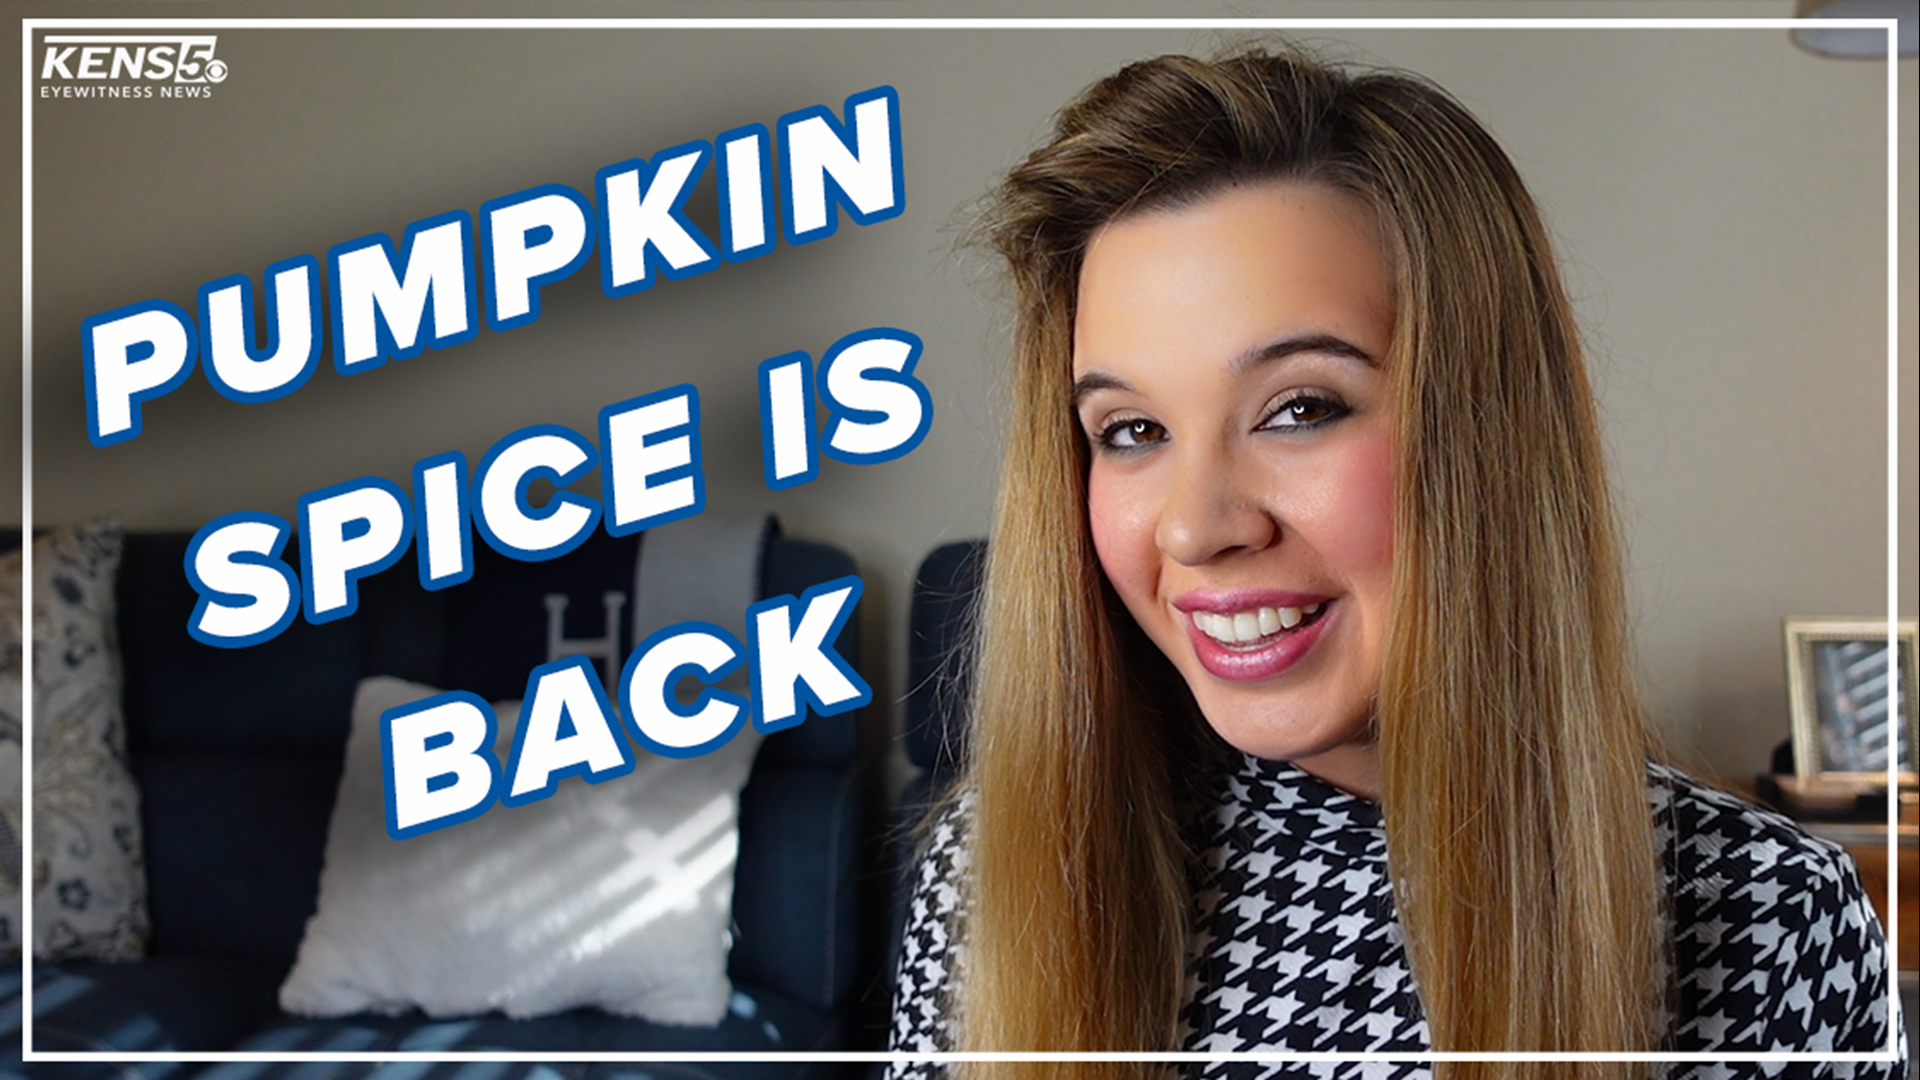 Pumpkin Spice lovers: Your time has come. The iconic pumpkin spice lattes, espresso and baked goods are back. Digital reporter Lexi Hazlett has the details.